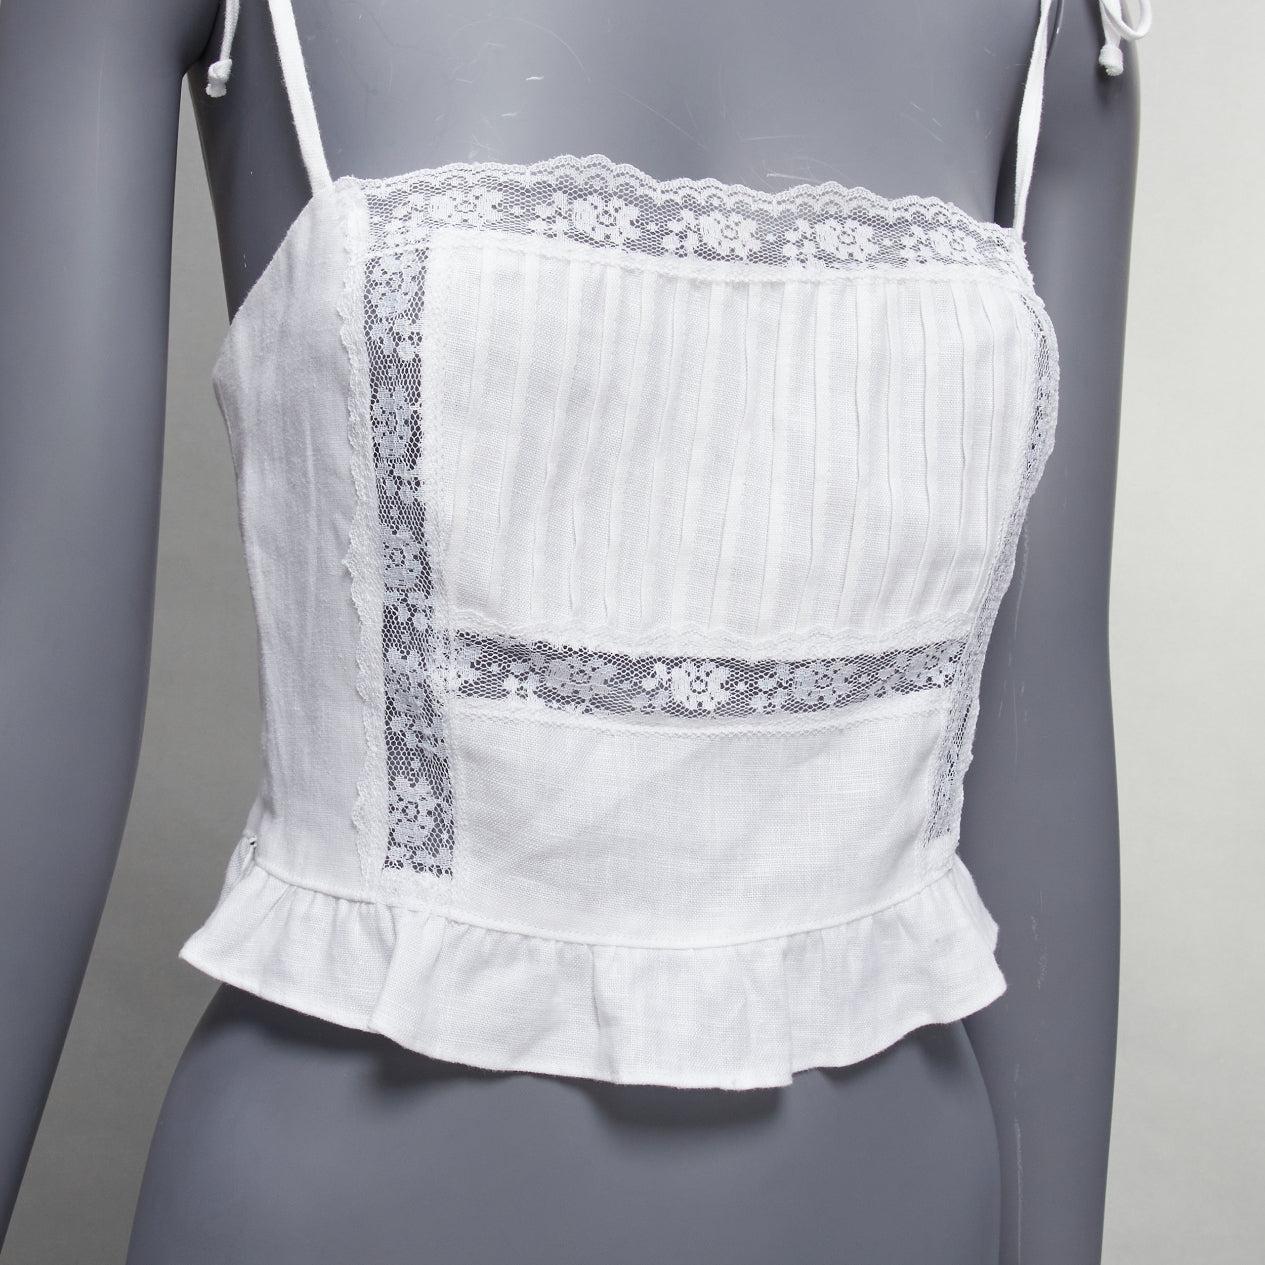 REFORMATION Mason white pleated lace trim ruffle tie strap vest US0 XS
Reference: SNKO/A00393
Brand: Reformation
Model: Mason
Material: Linen
Color: White
Pattern: Solid
Closure: Self Tie
Lining: White Fabric
Extra Details: White linen Mason crop